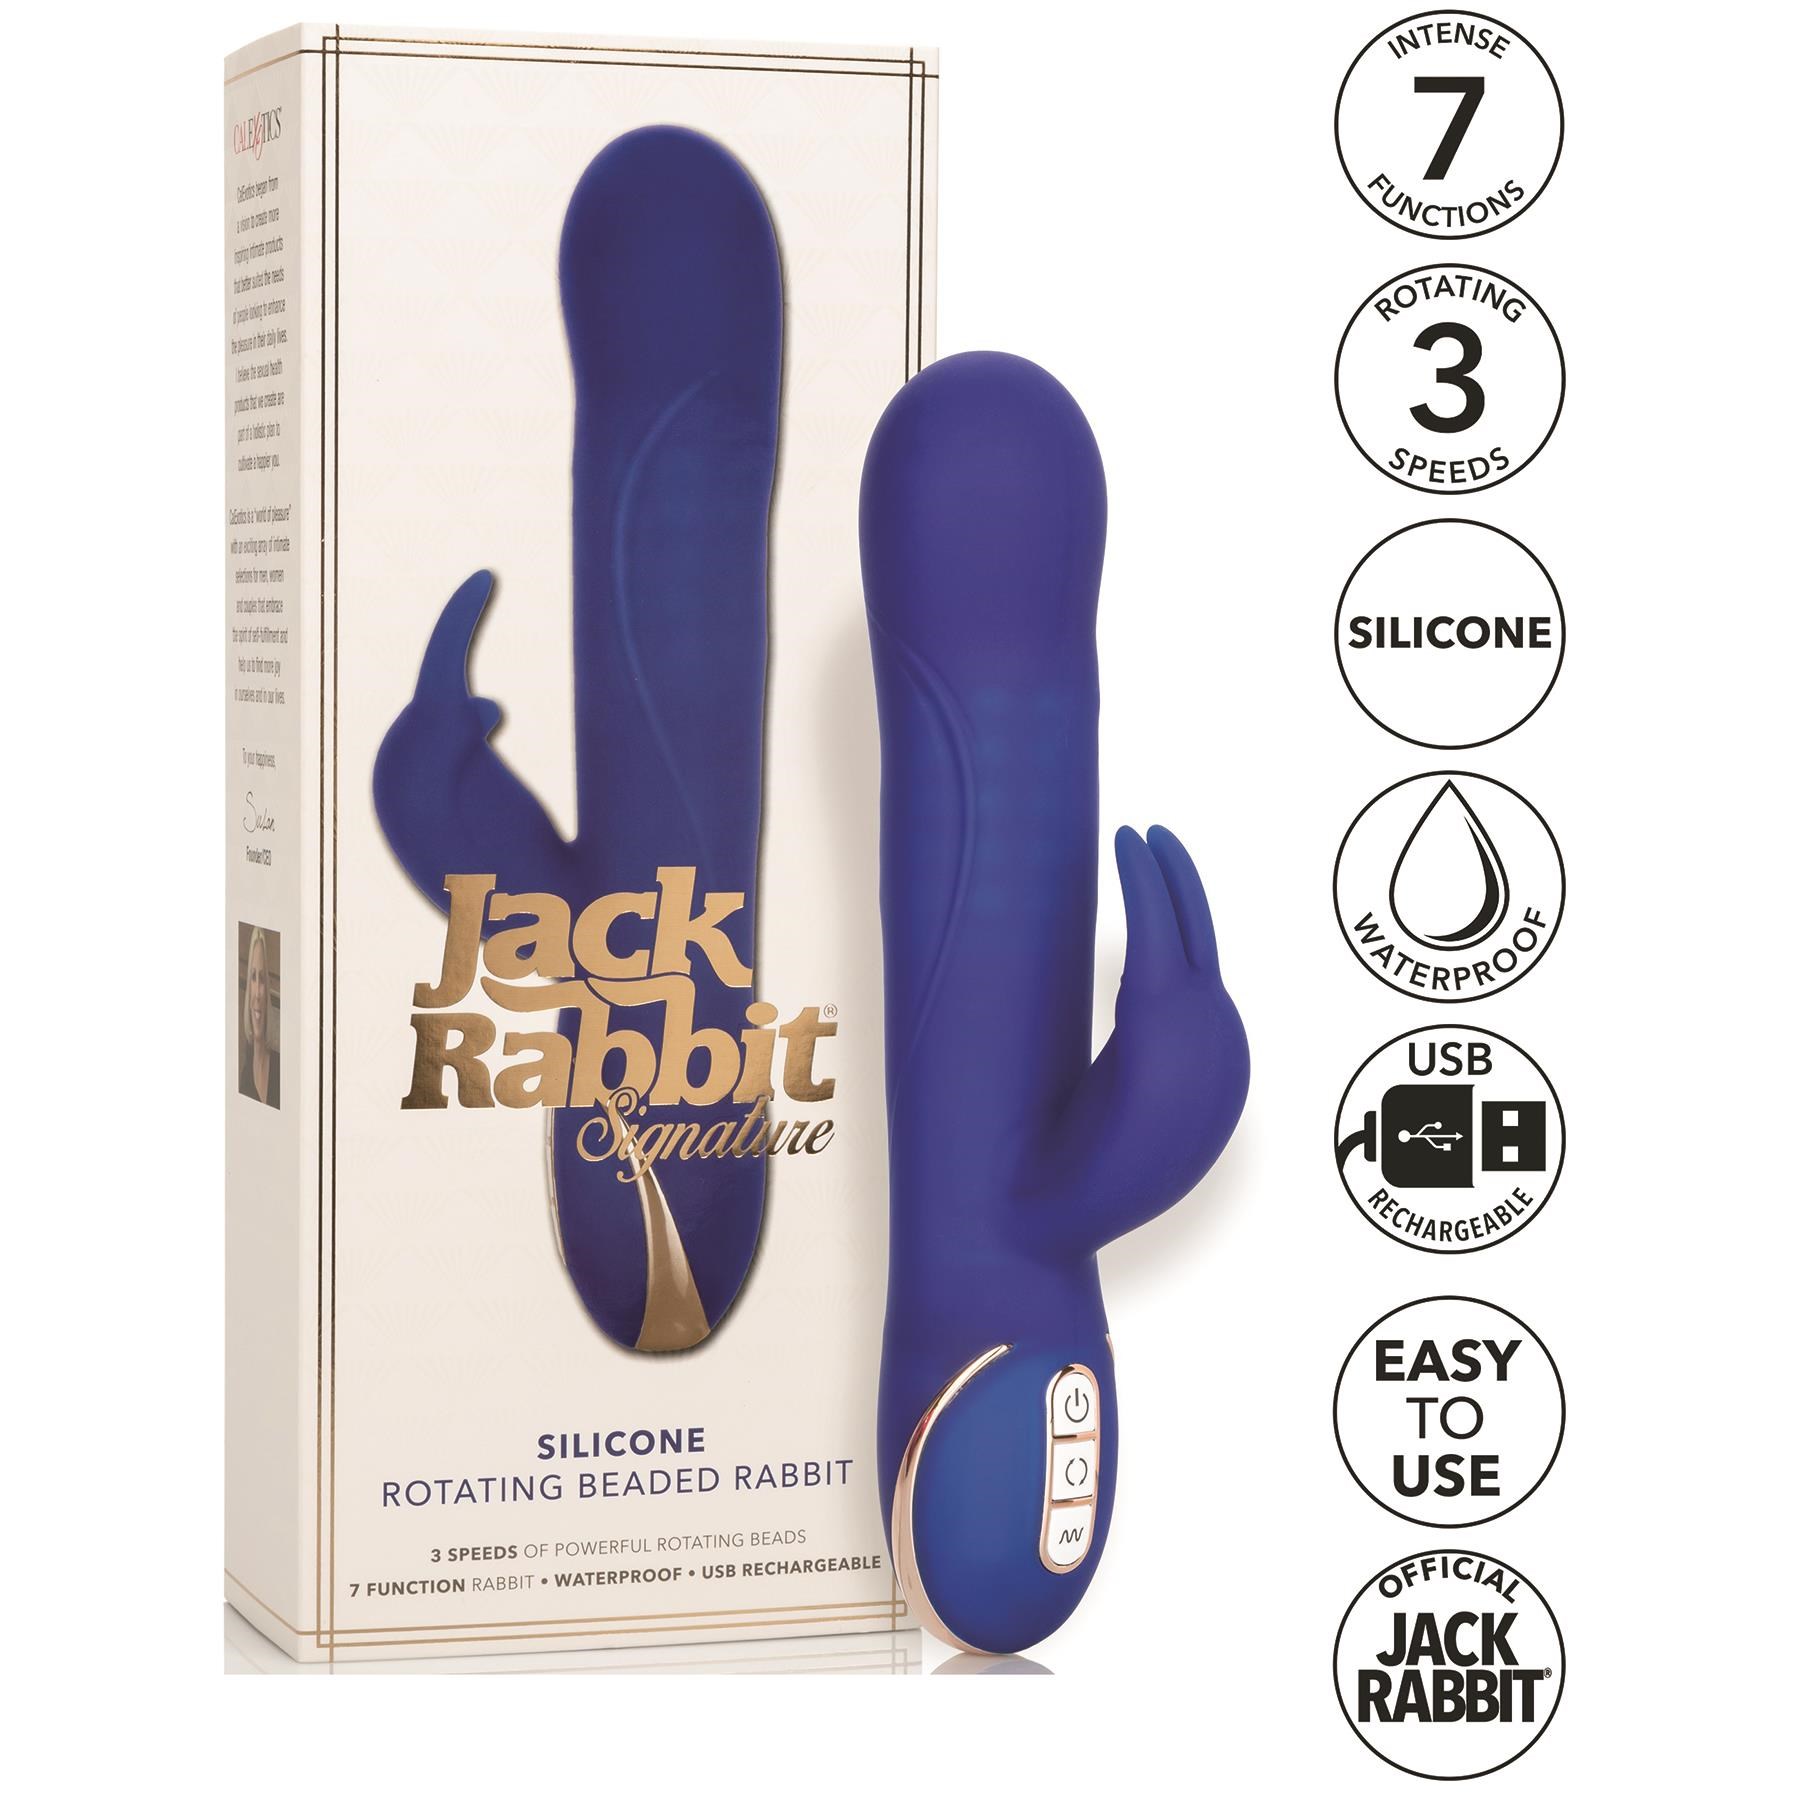 Jack Rabbit Signature Rechargeable Rotating Beaded Rabbit Showing Features